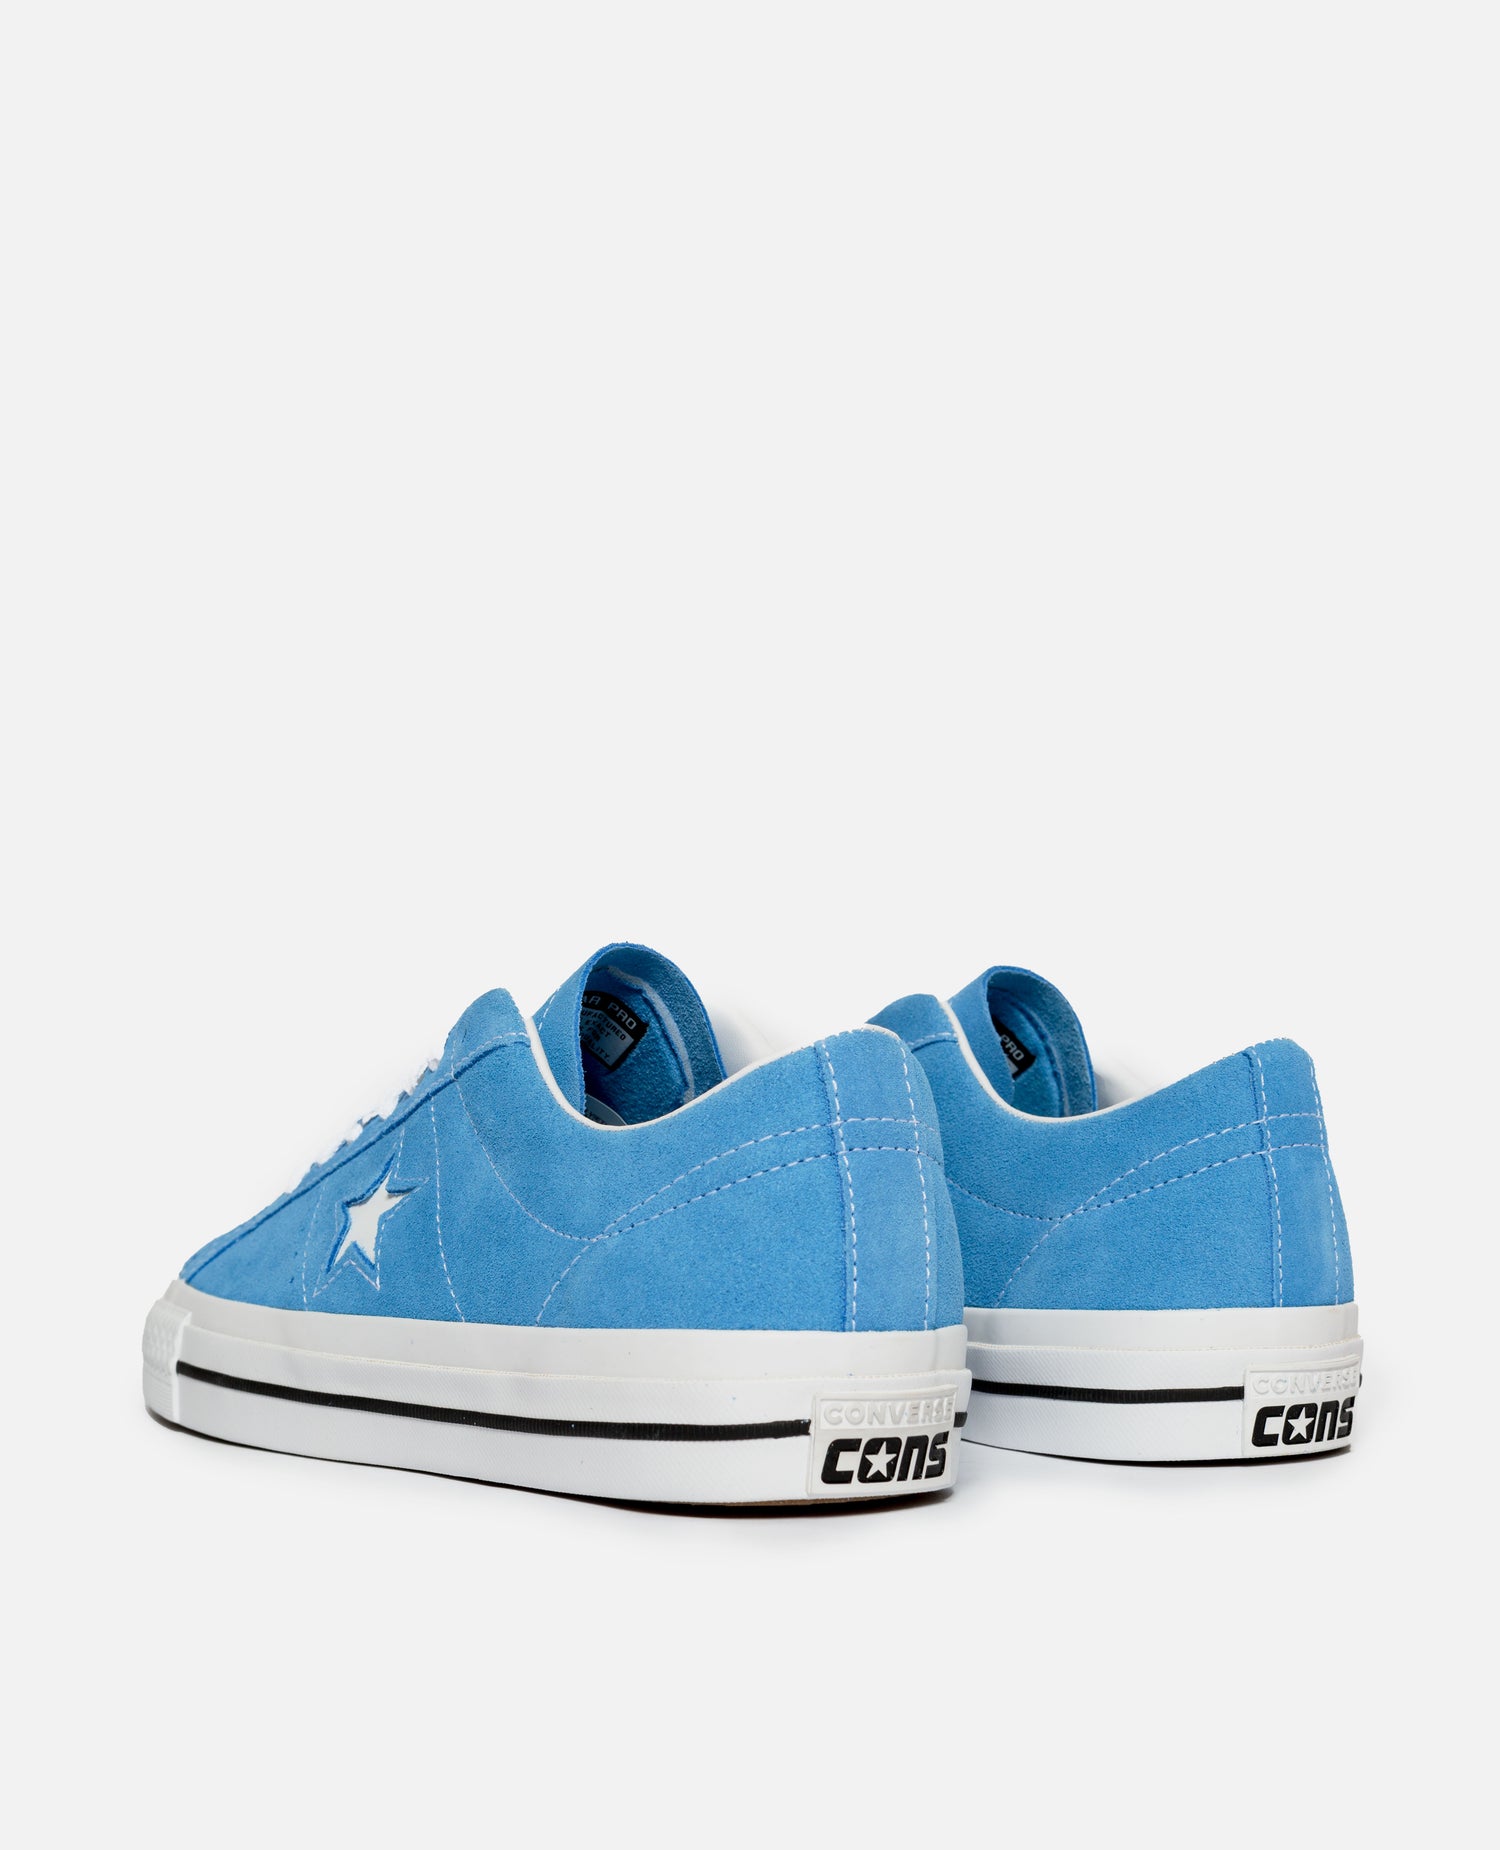 Converse One Star Pro Suede (University Blue/White)